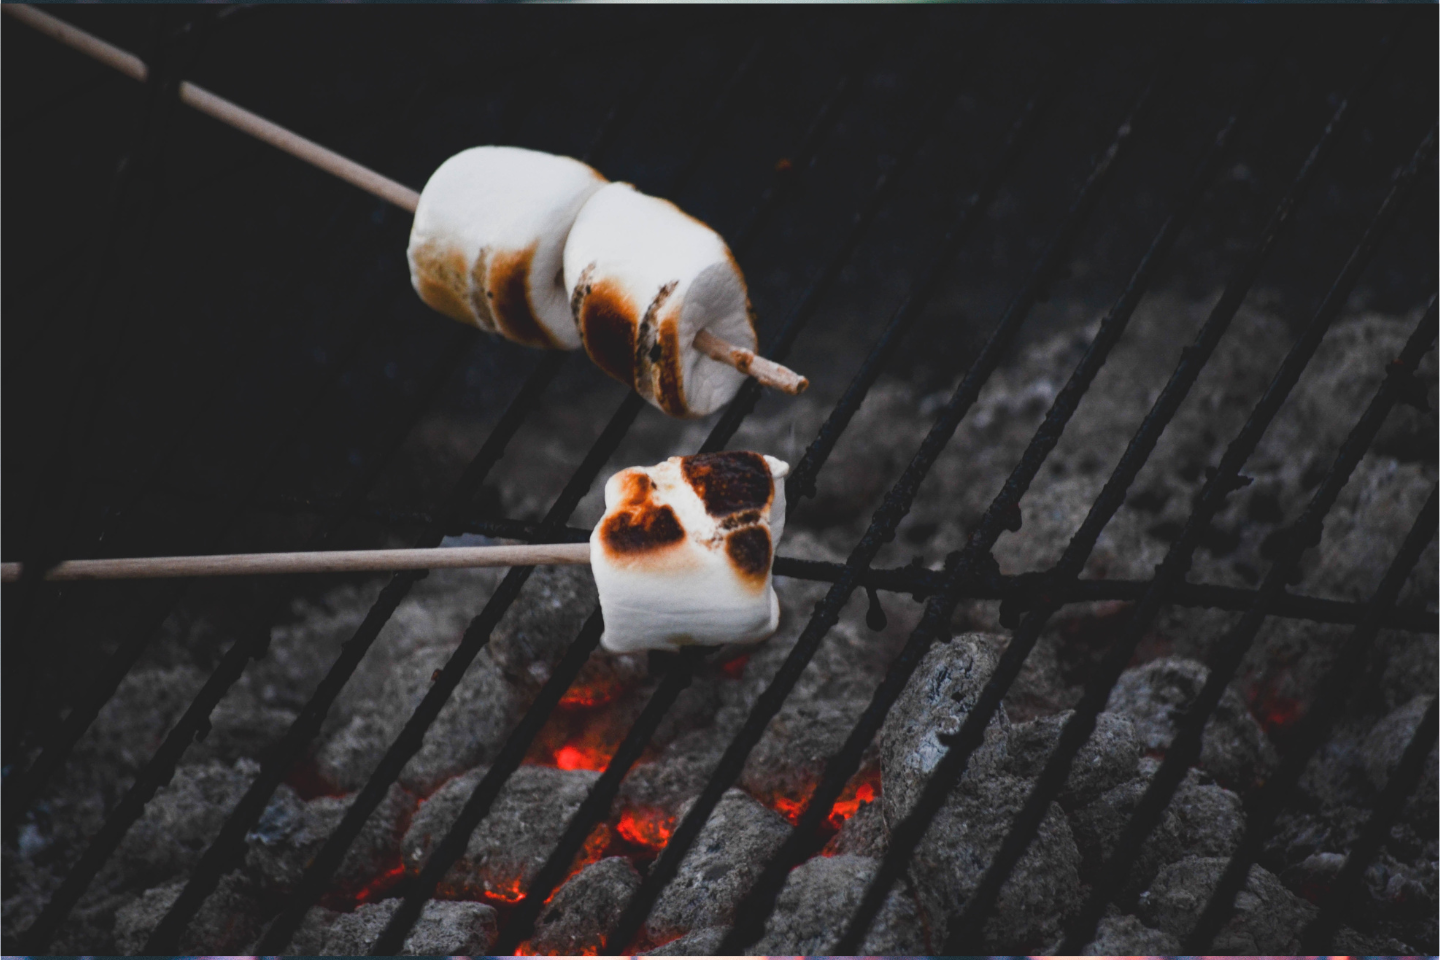 S'mores on the BBQ